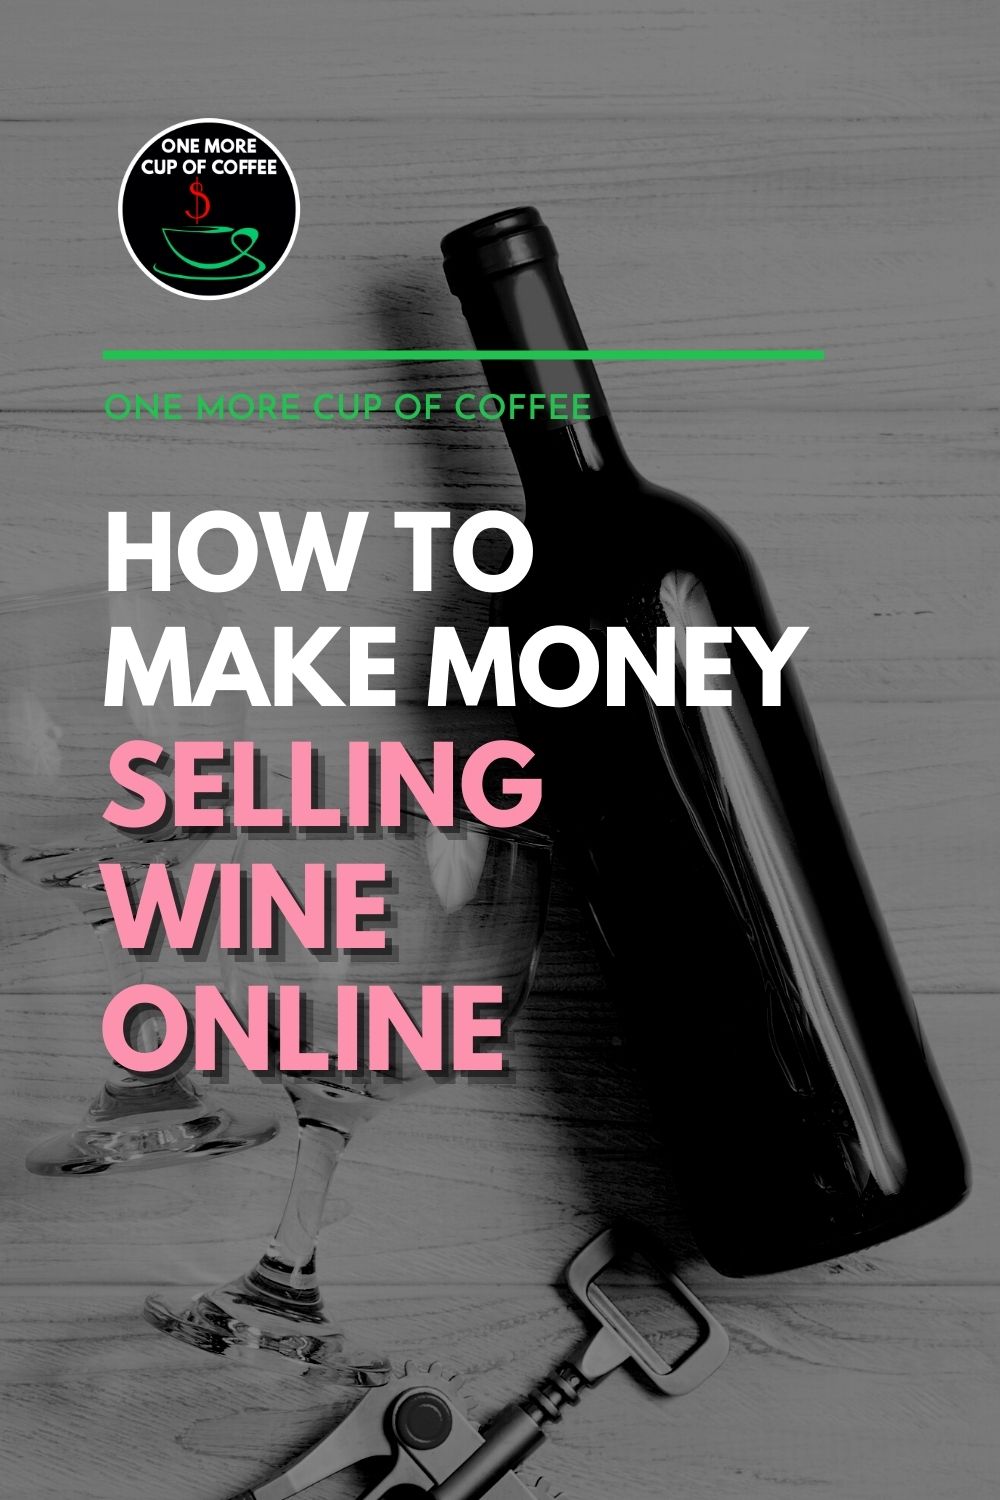 How To Make Money Selling Wine Online